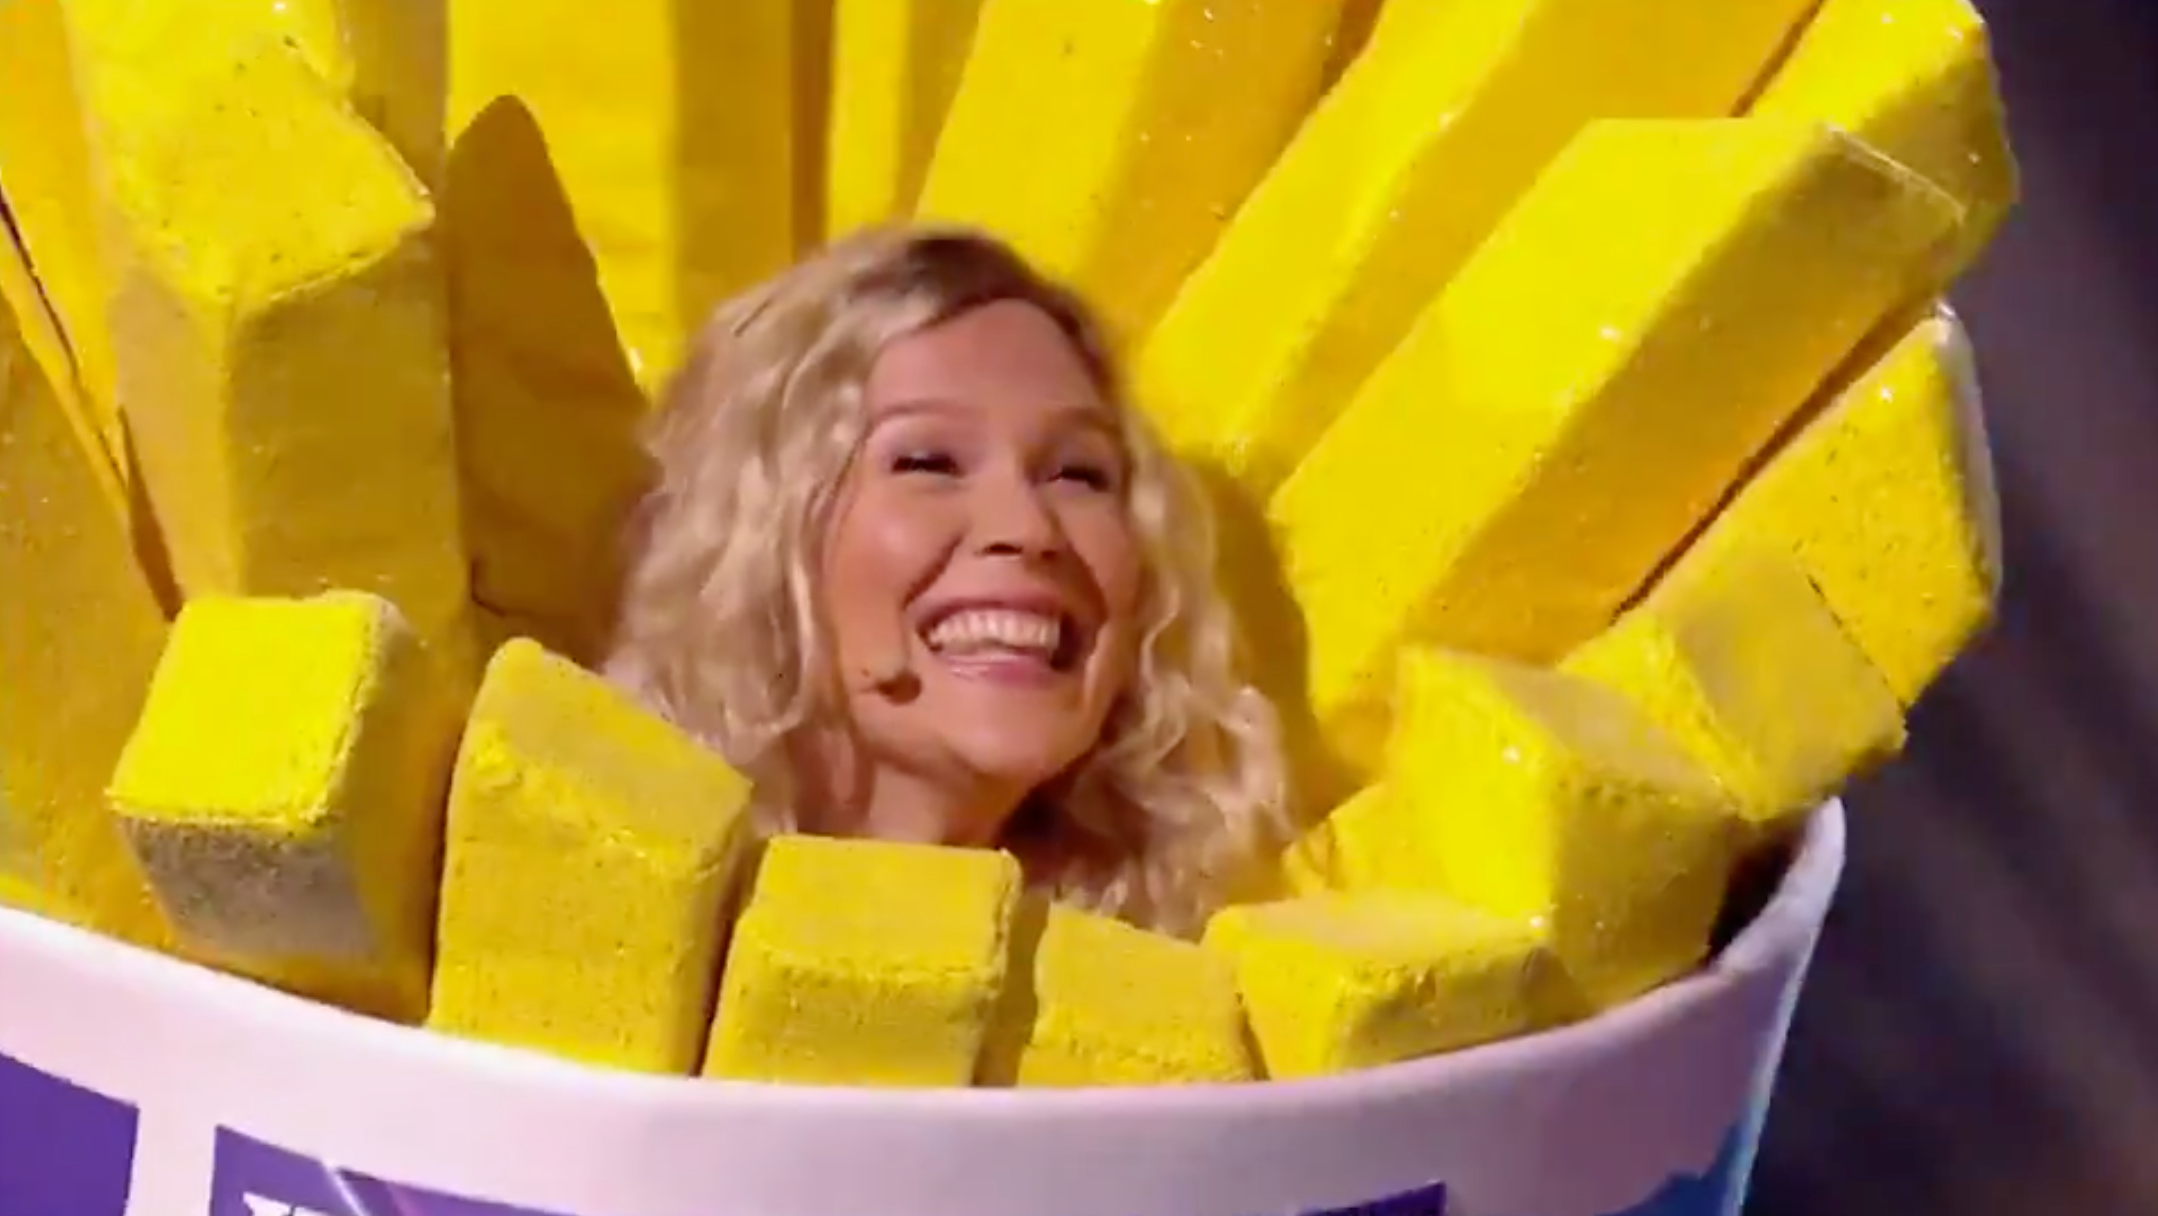 Joss Stone is unmasked as Sausage on The Masked Singer